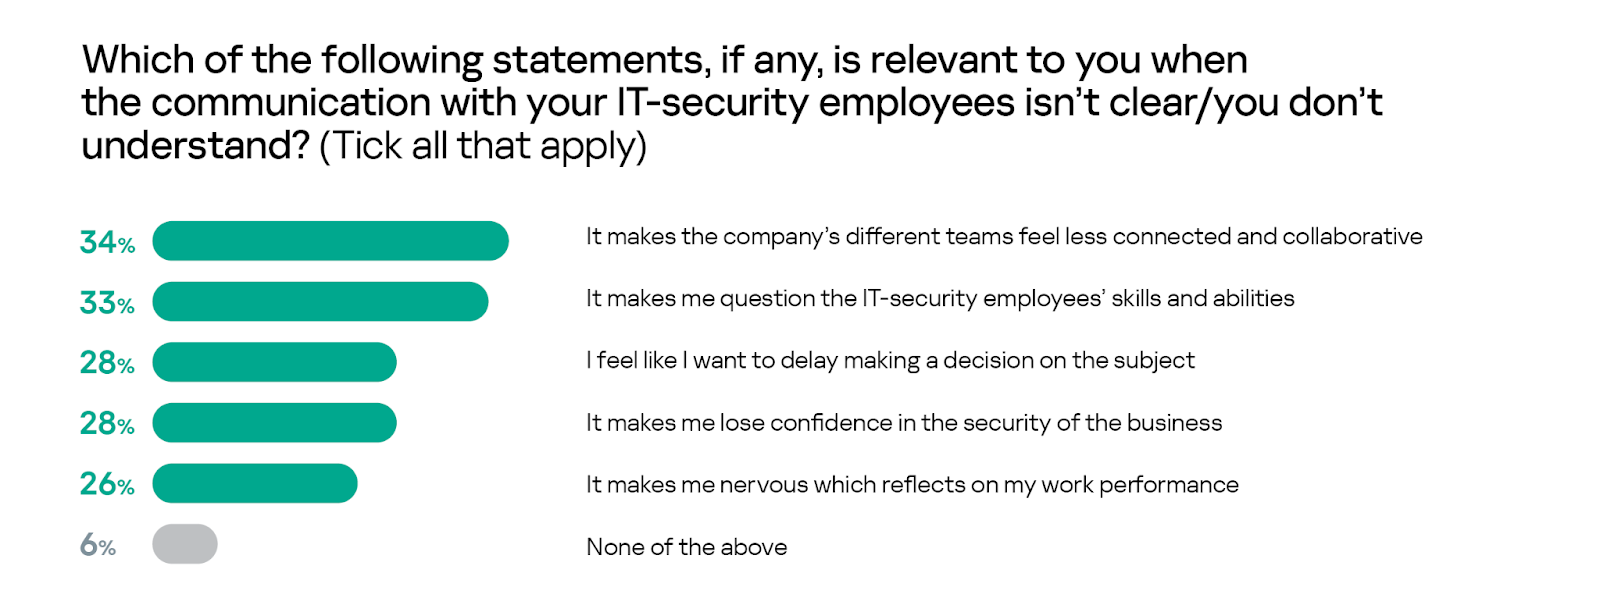 Miscommunications in IT security lead to cybersecurity incidents in 62% of companies 1